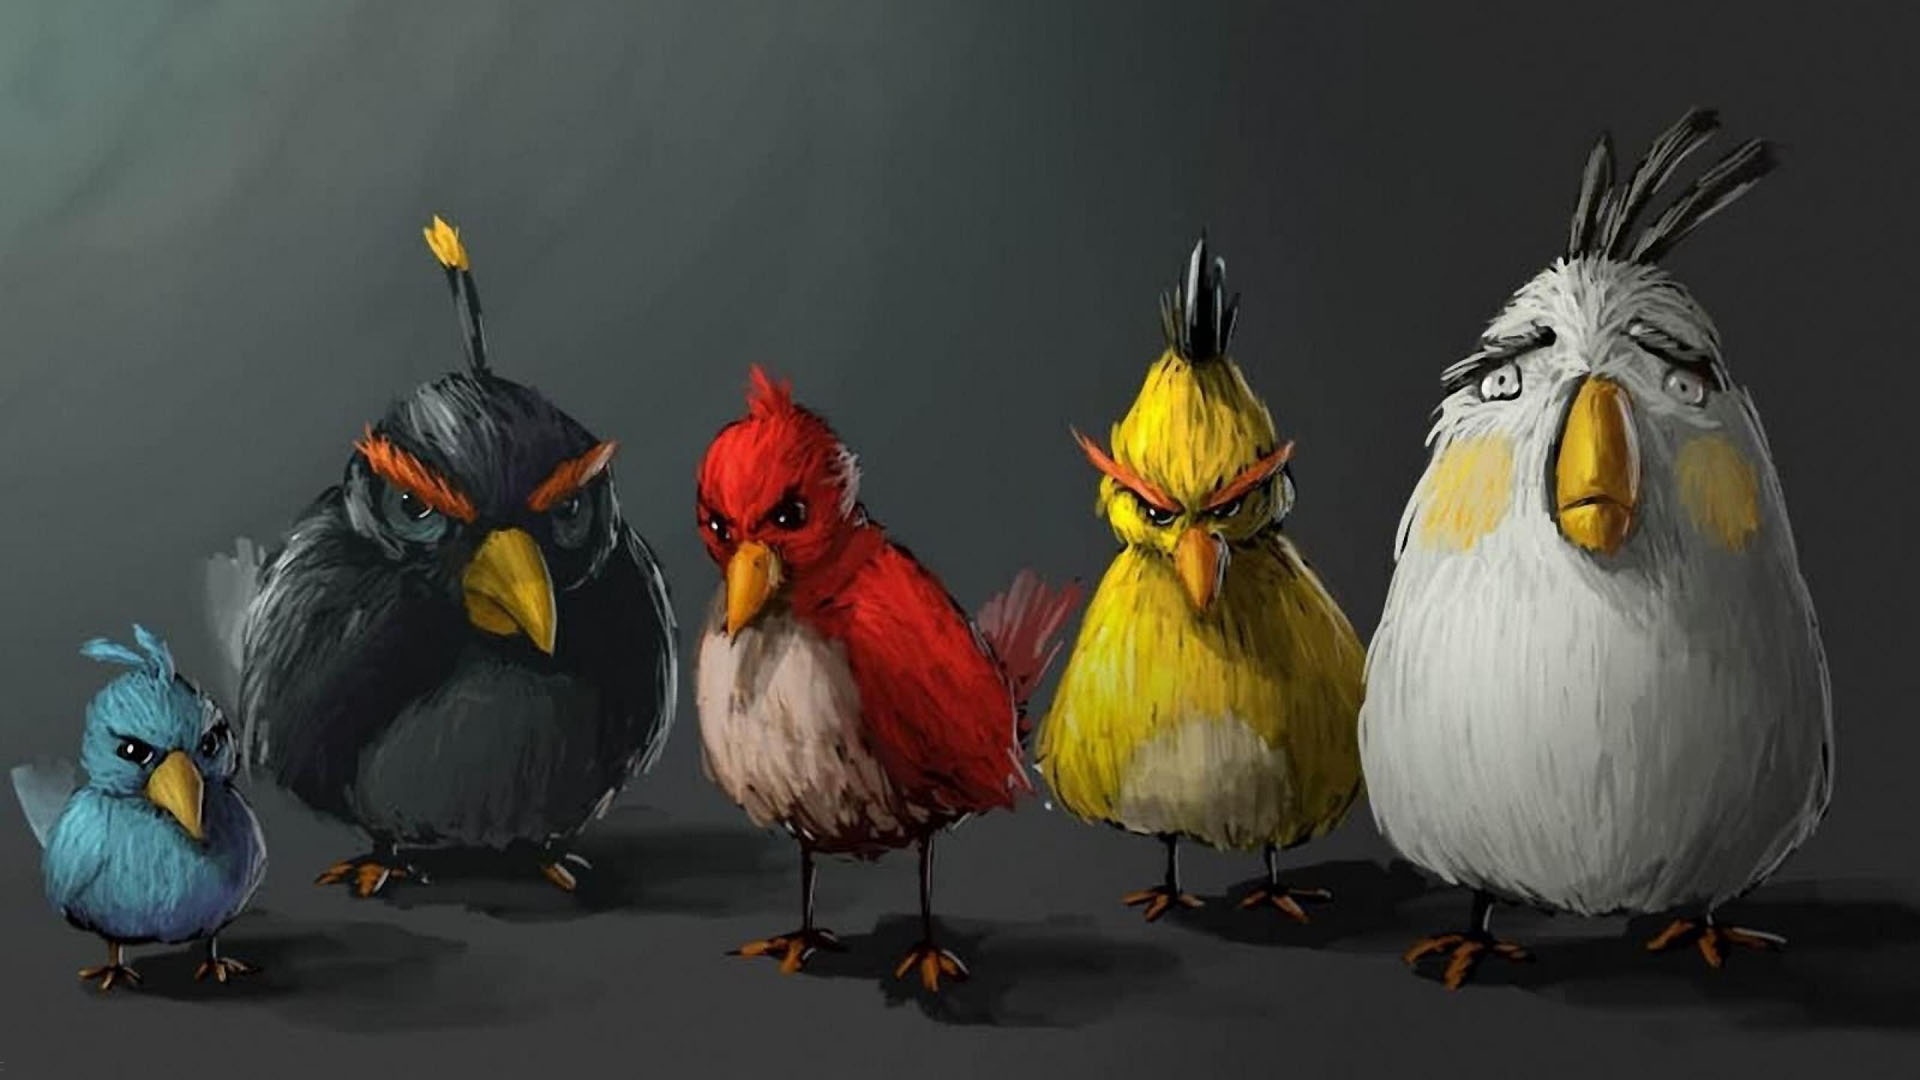 Angry Birds Art Pictures HD Wallpaper Angry Birds Art Pictures 1920x1080